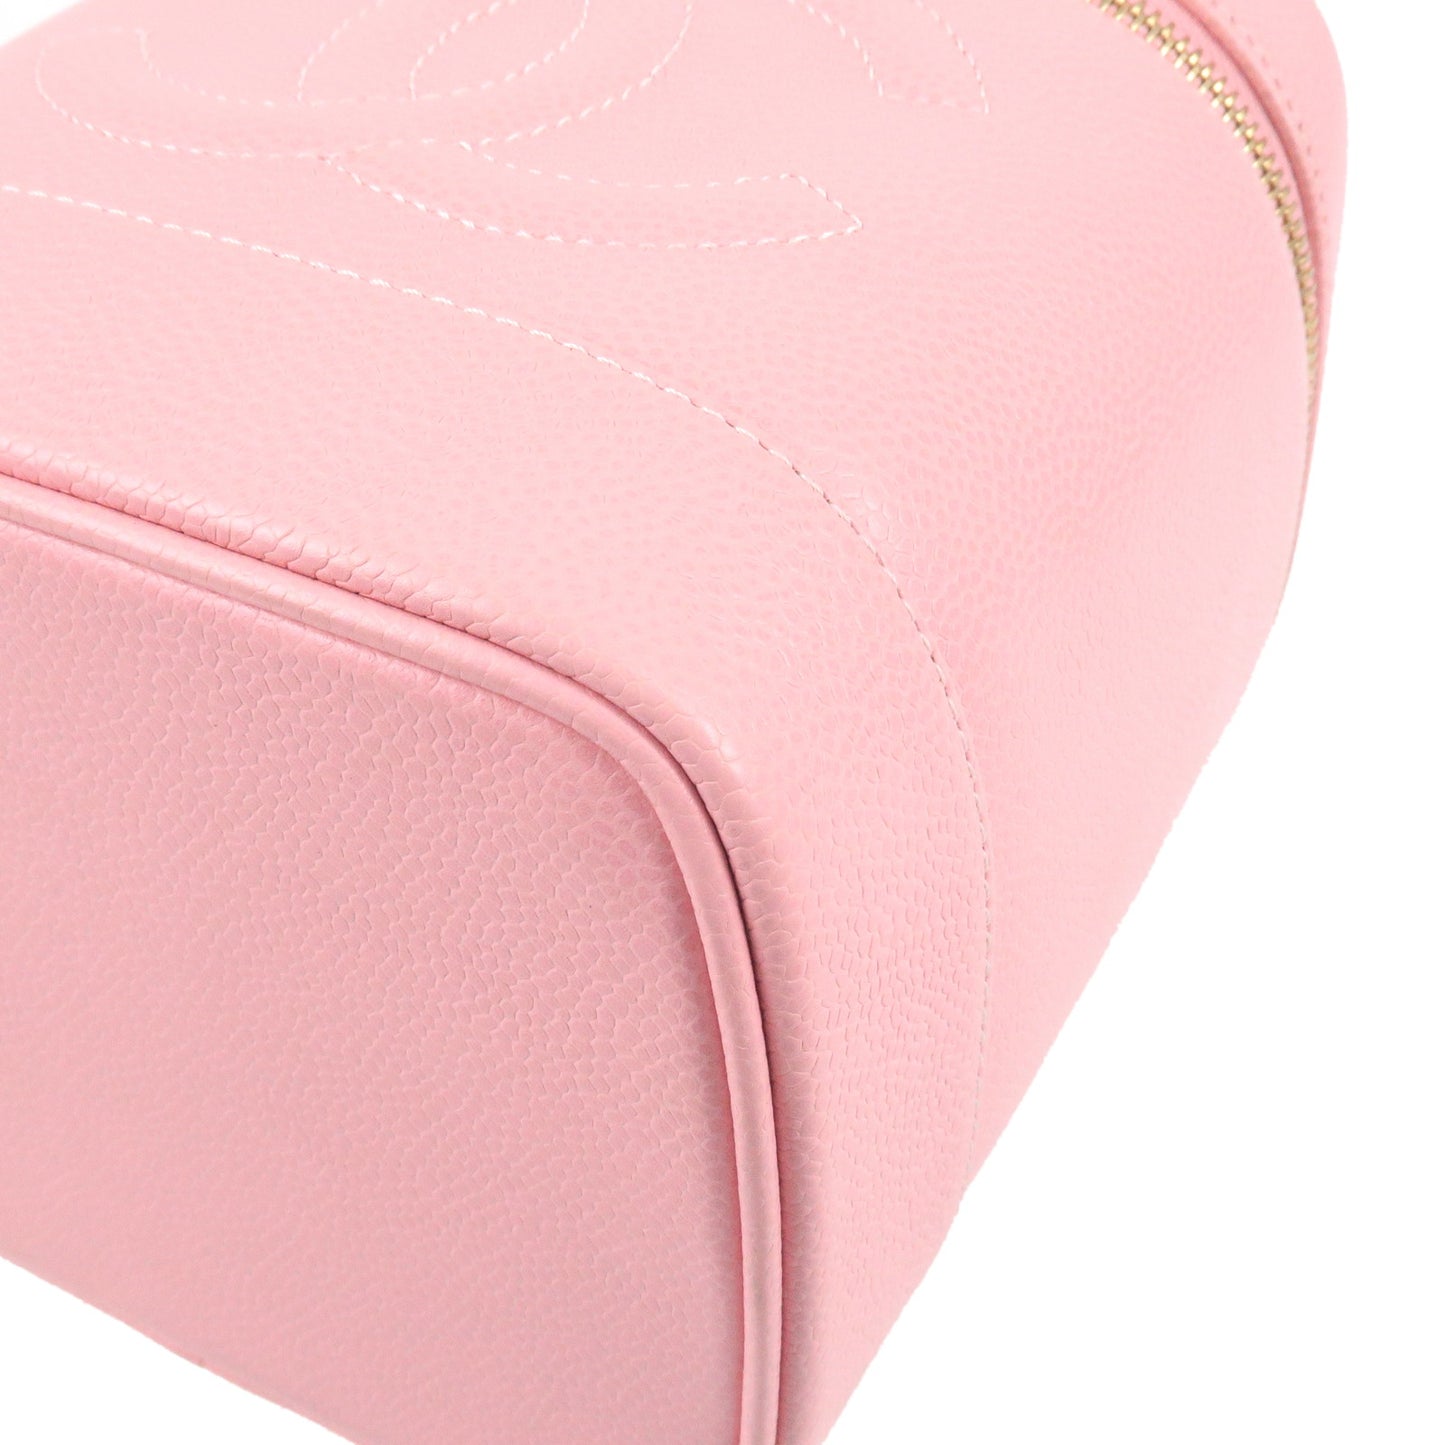 CHANEL Caviar Skin Vanity Bag Hand Bag Cosmetic Pouch Pink A01998